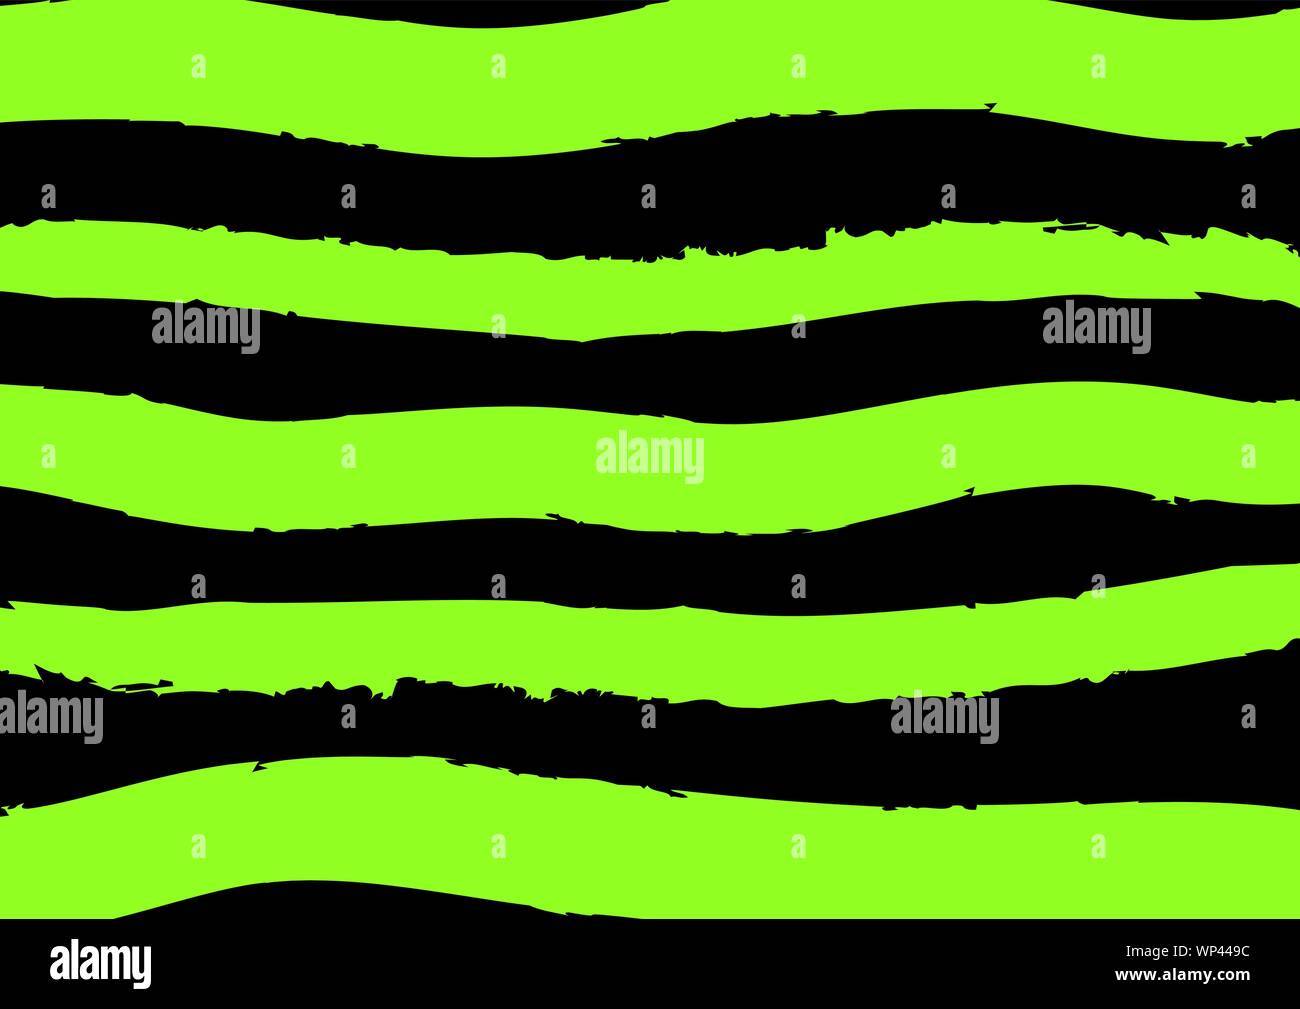 Slime Stock Vector Images - Alamy